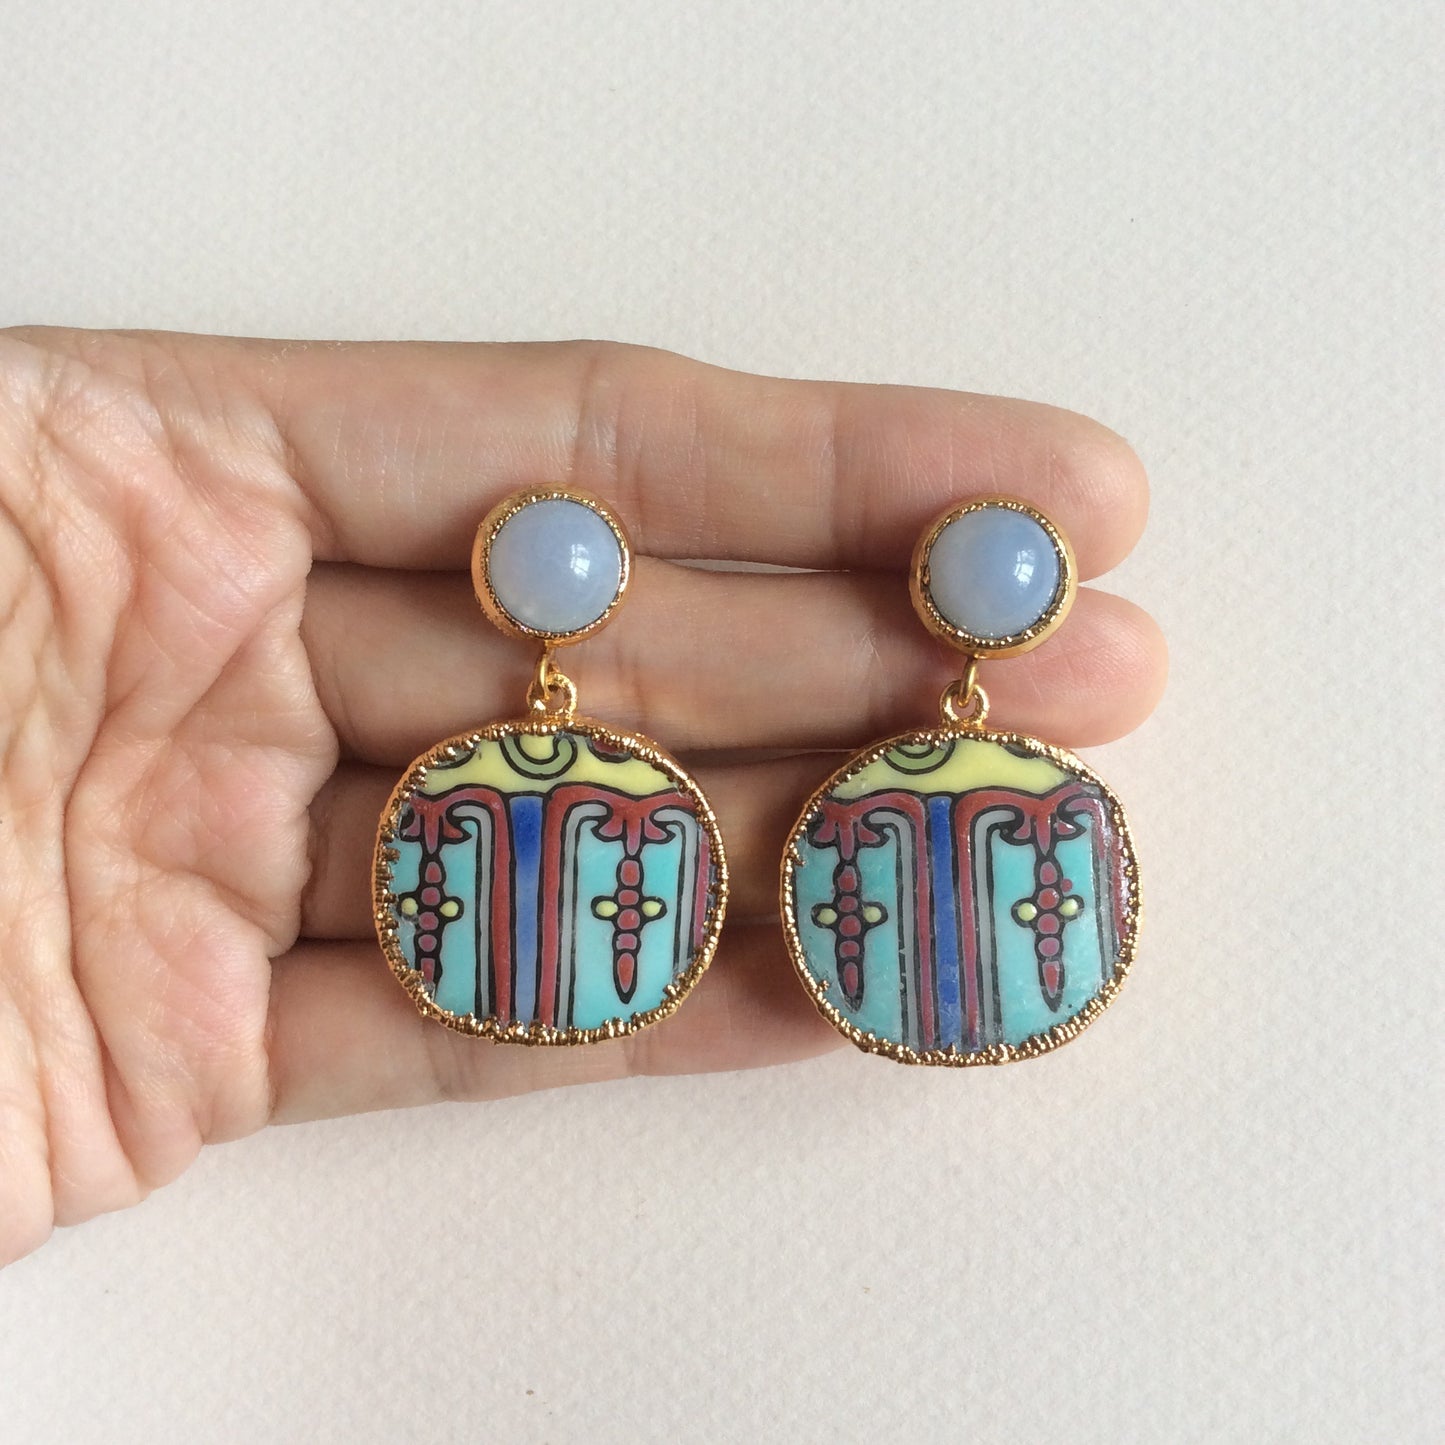 Peranakan porcelain earrings with blue chalcedony studs